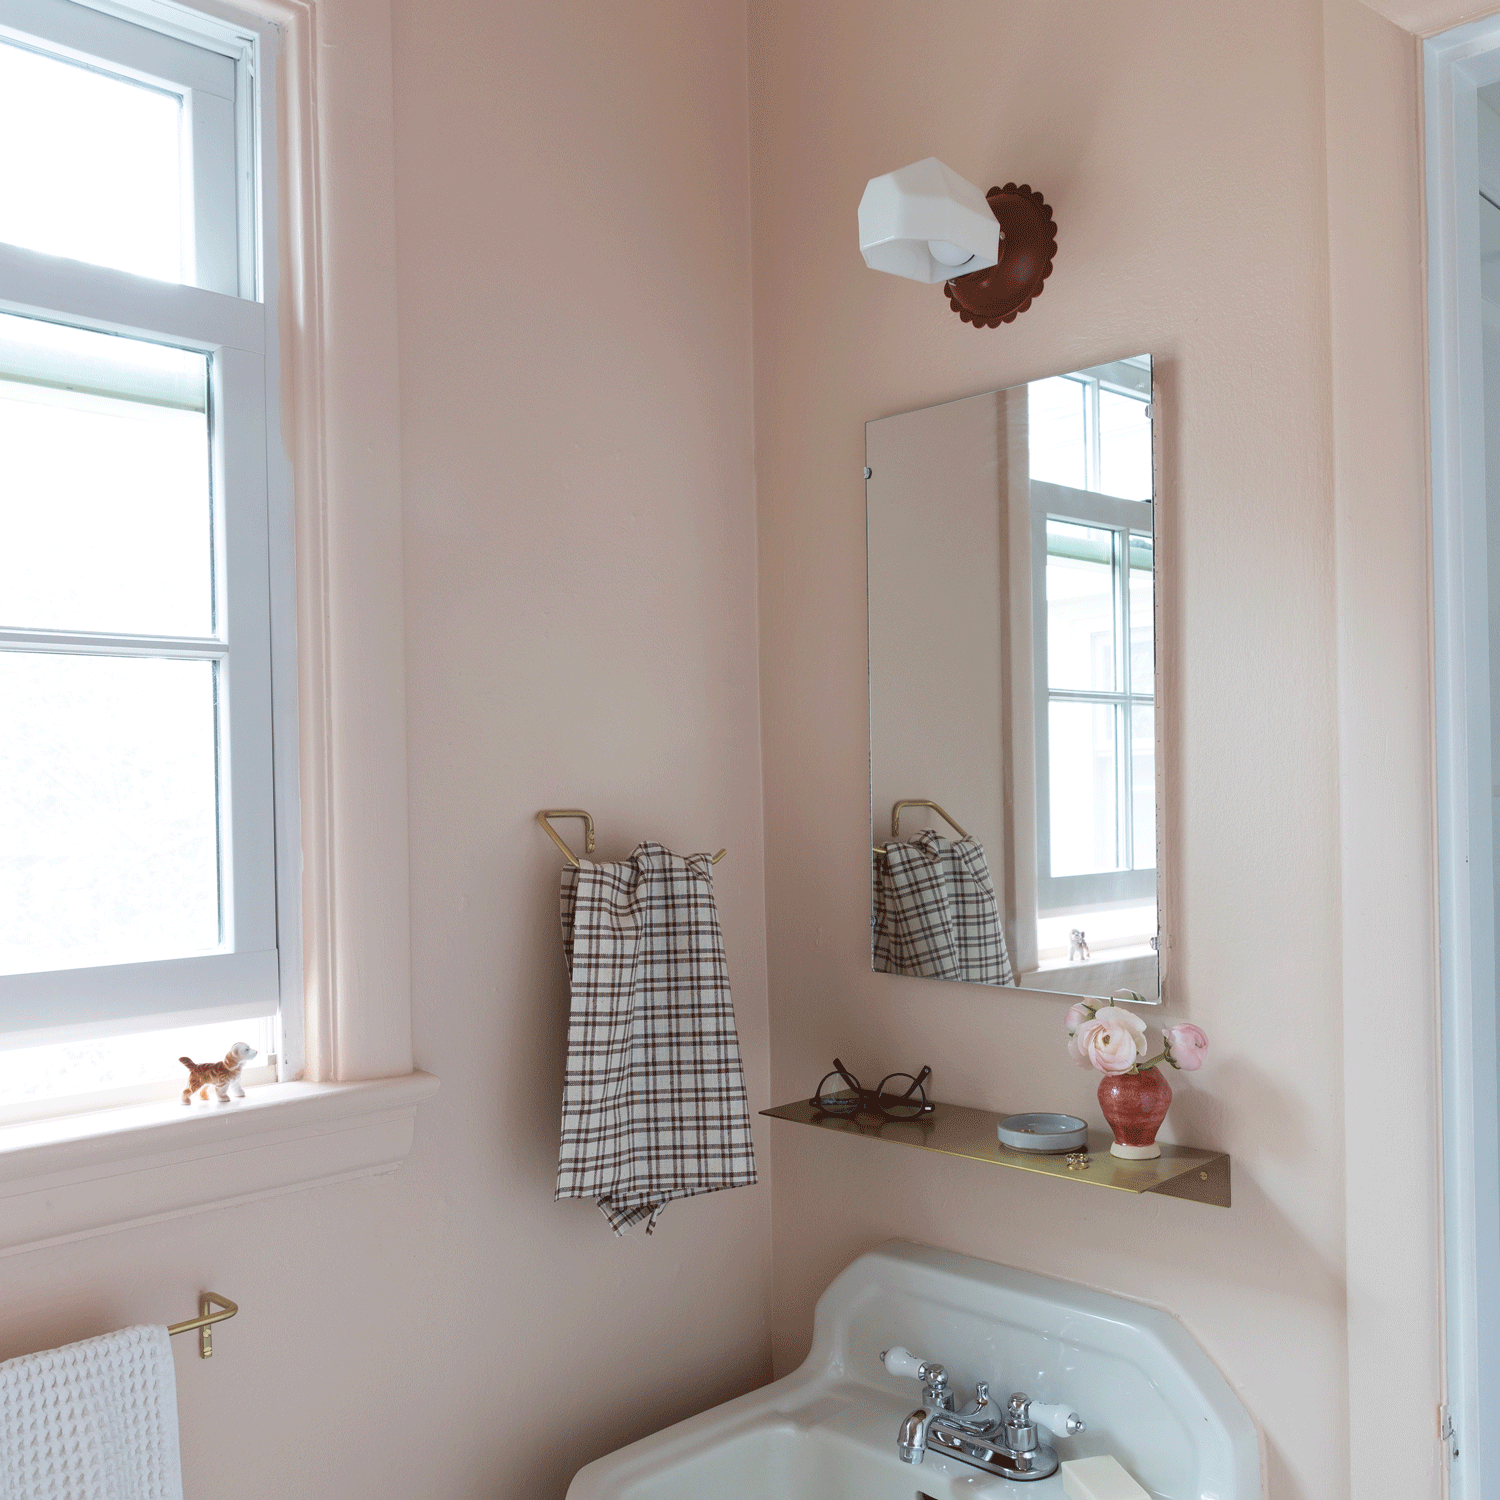 Fran wall sconce in a small bathroom.